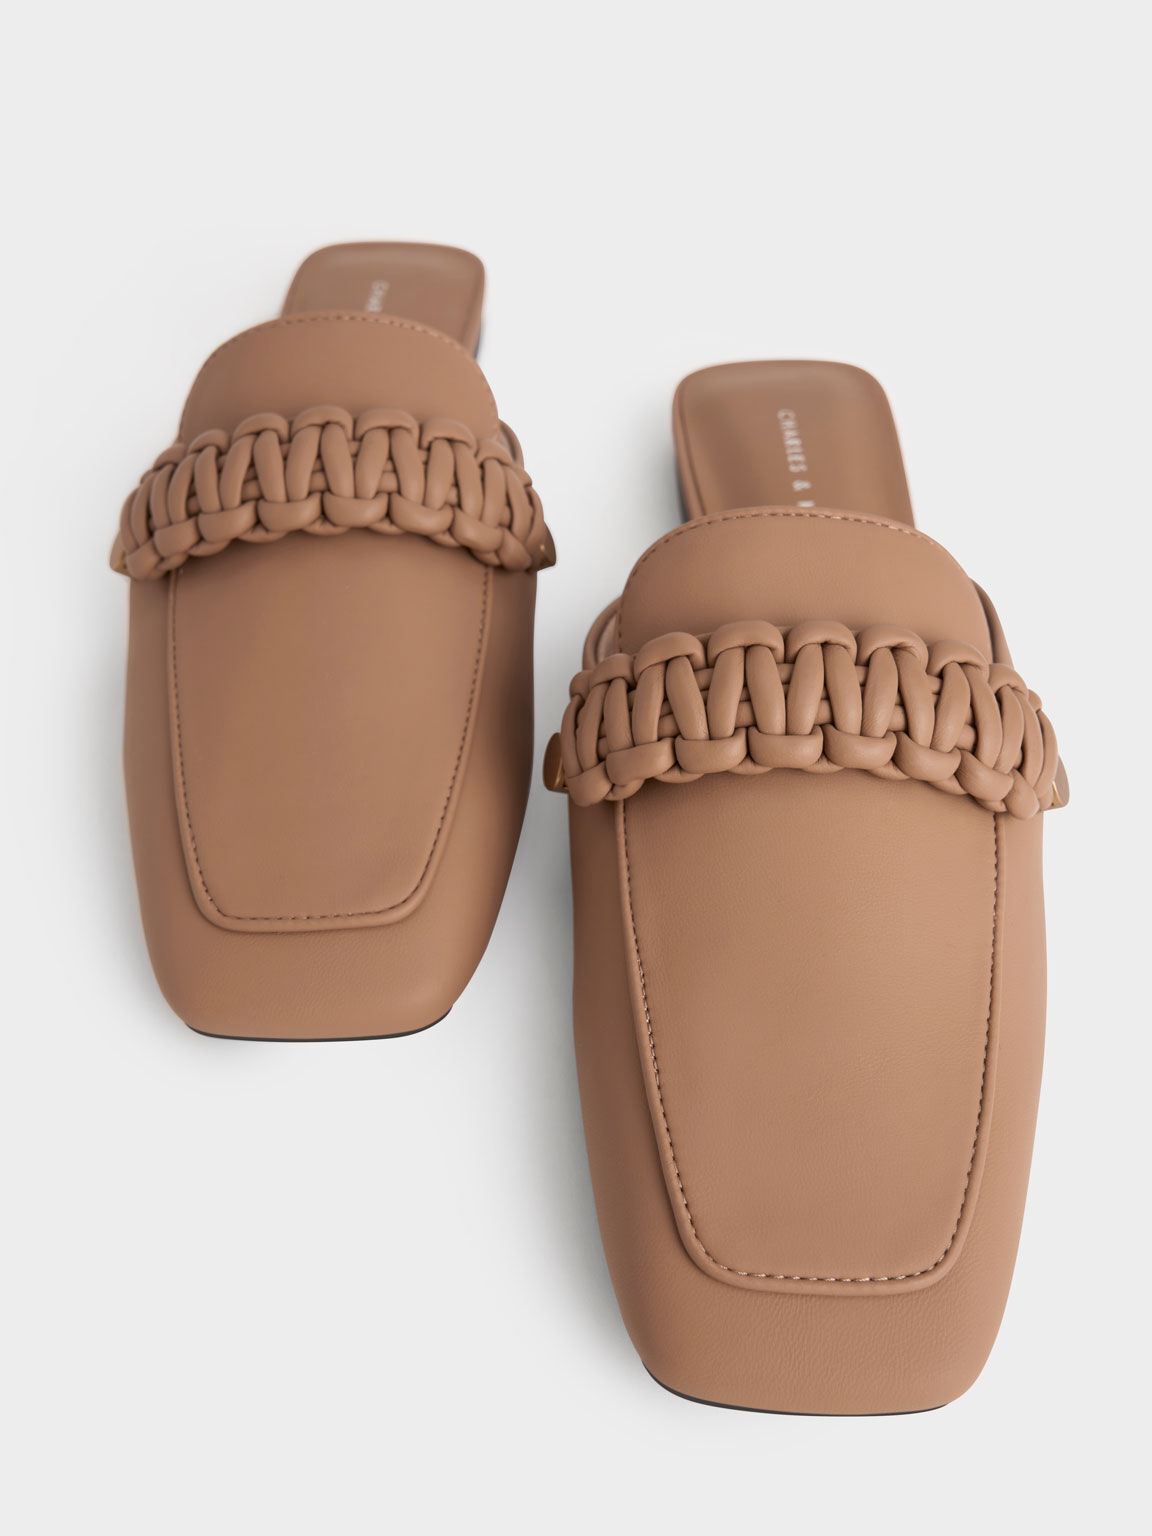 Sepatu Mules Braided Penny Loafer, Sand, hi-res